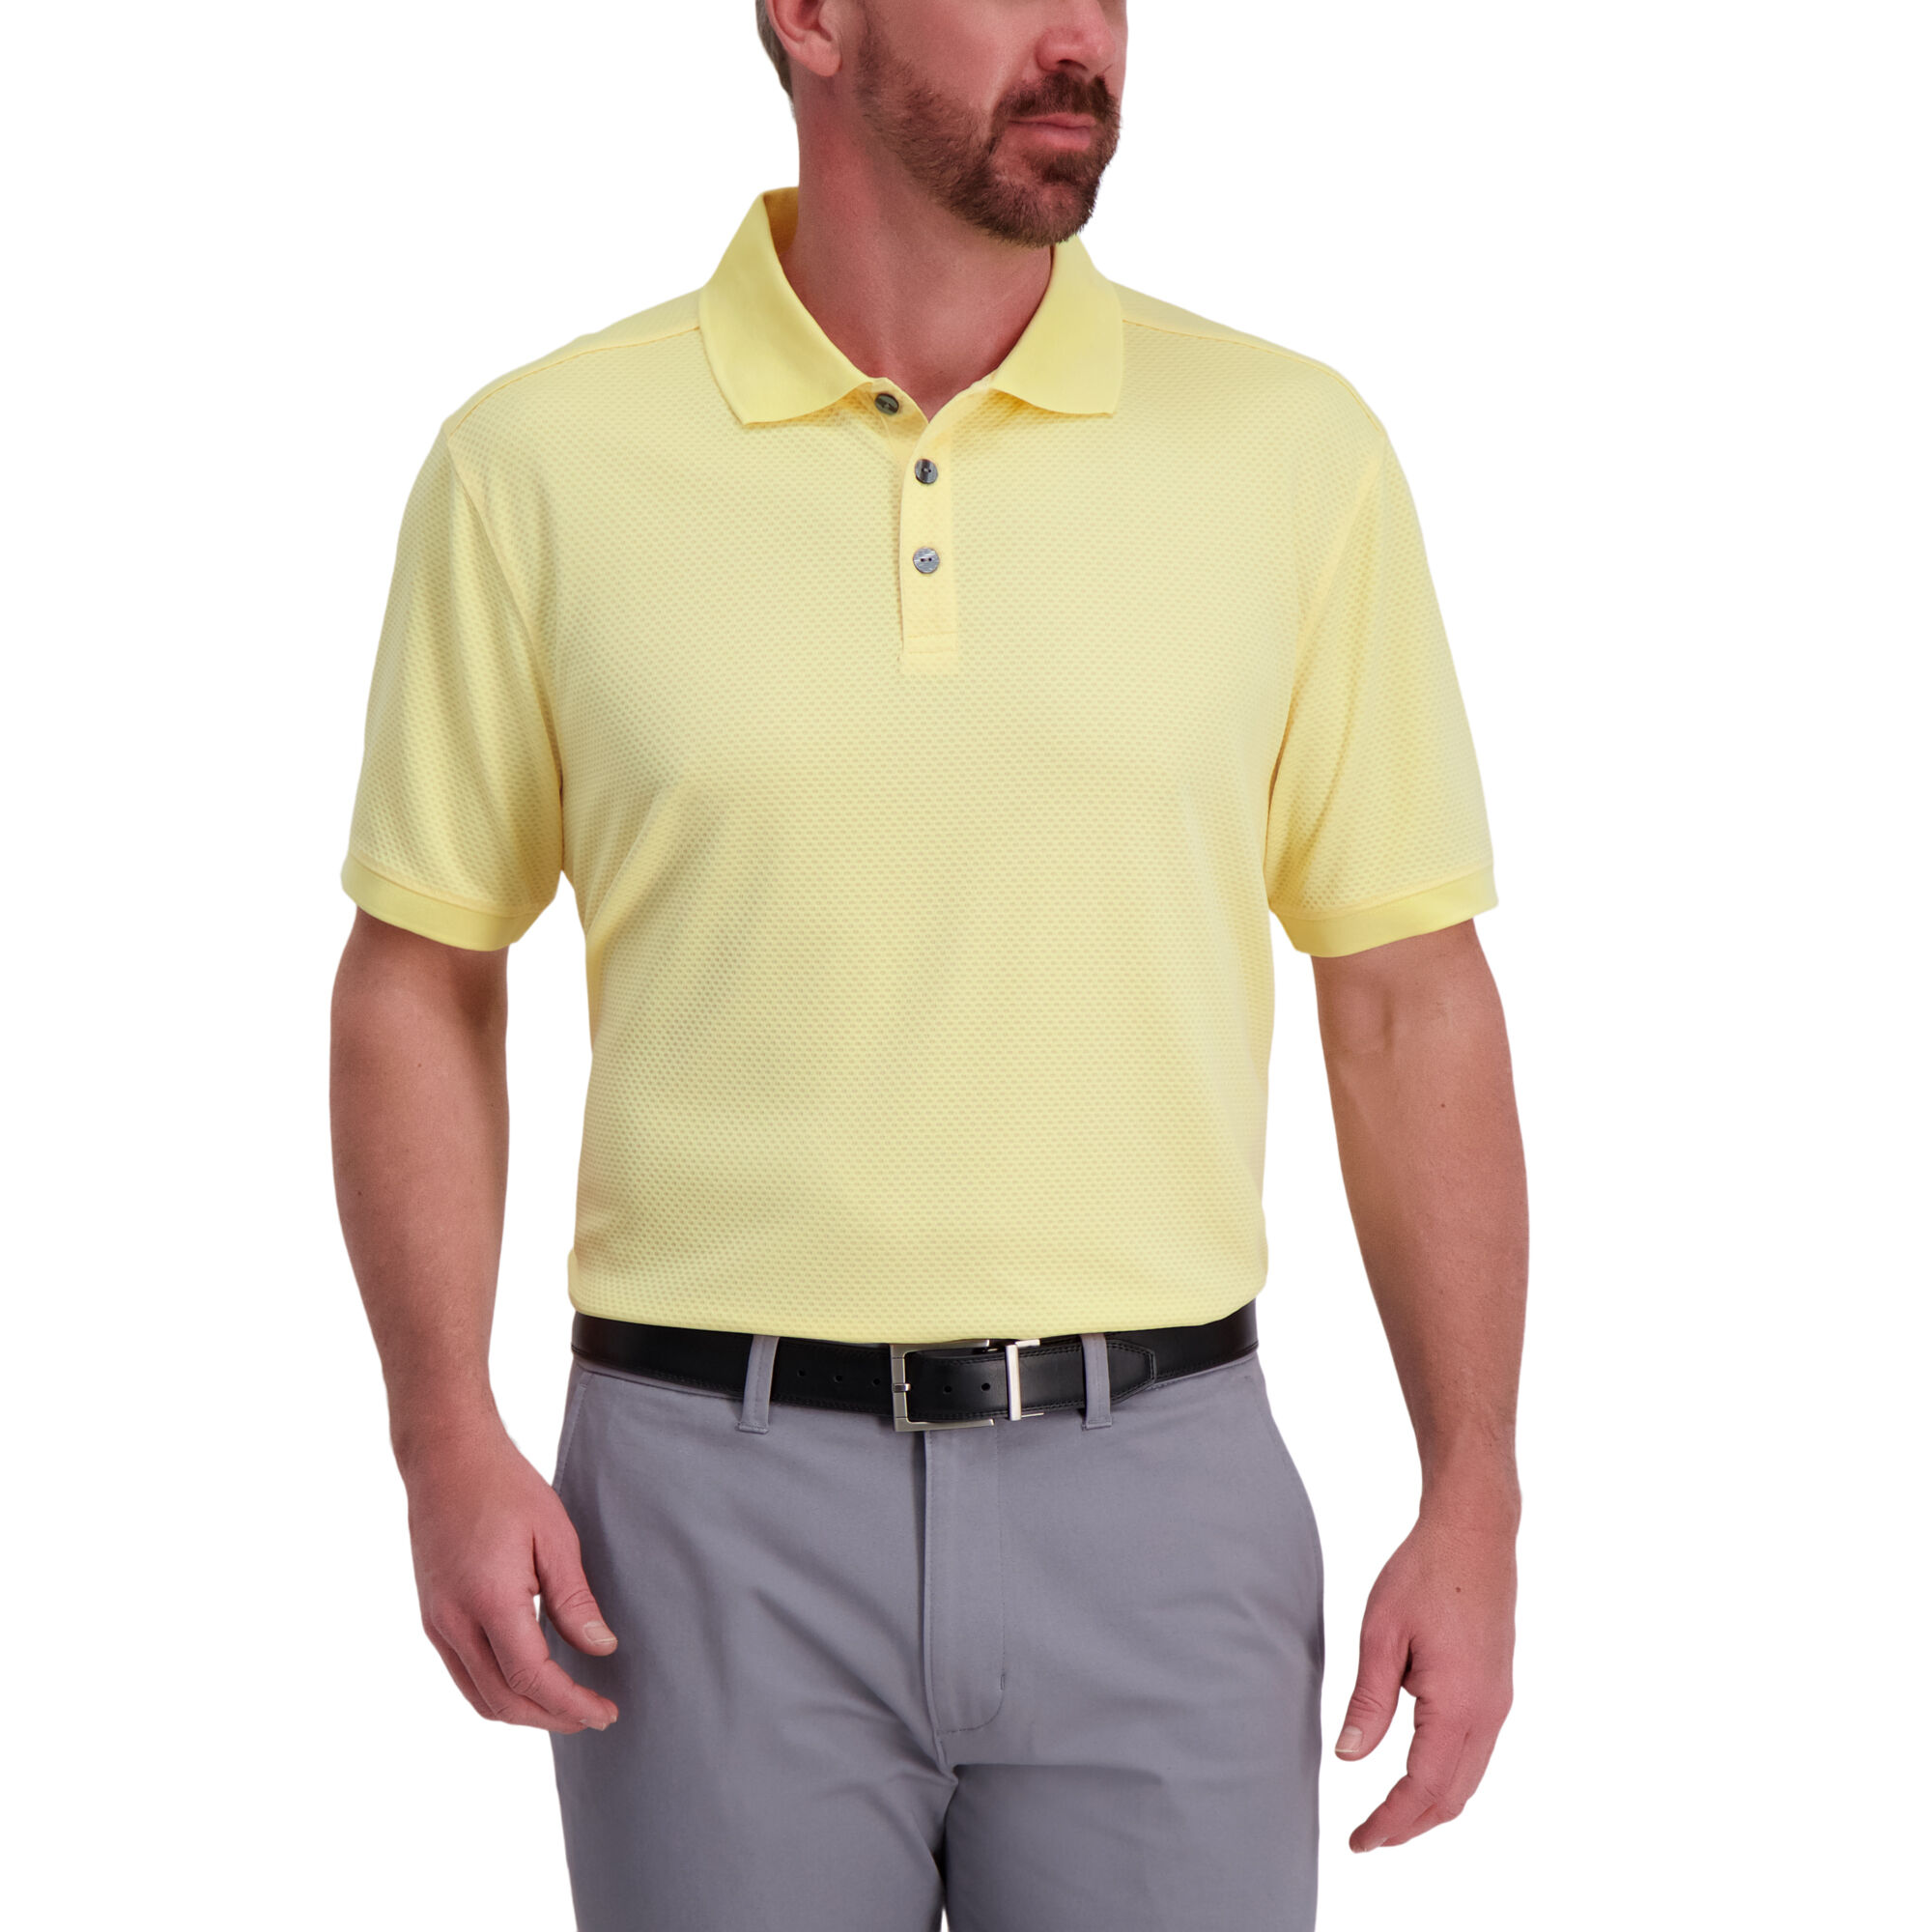 Haggar Cool 18 Pro Waffle Textured Golf Polo River Blue (028476) photo